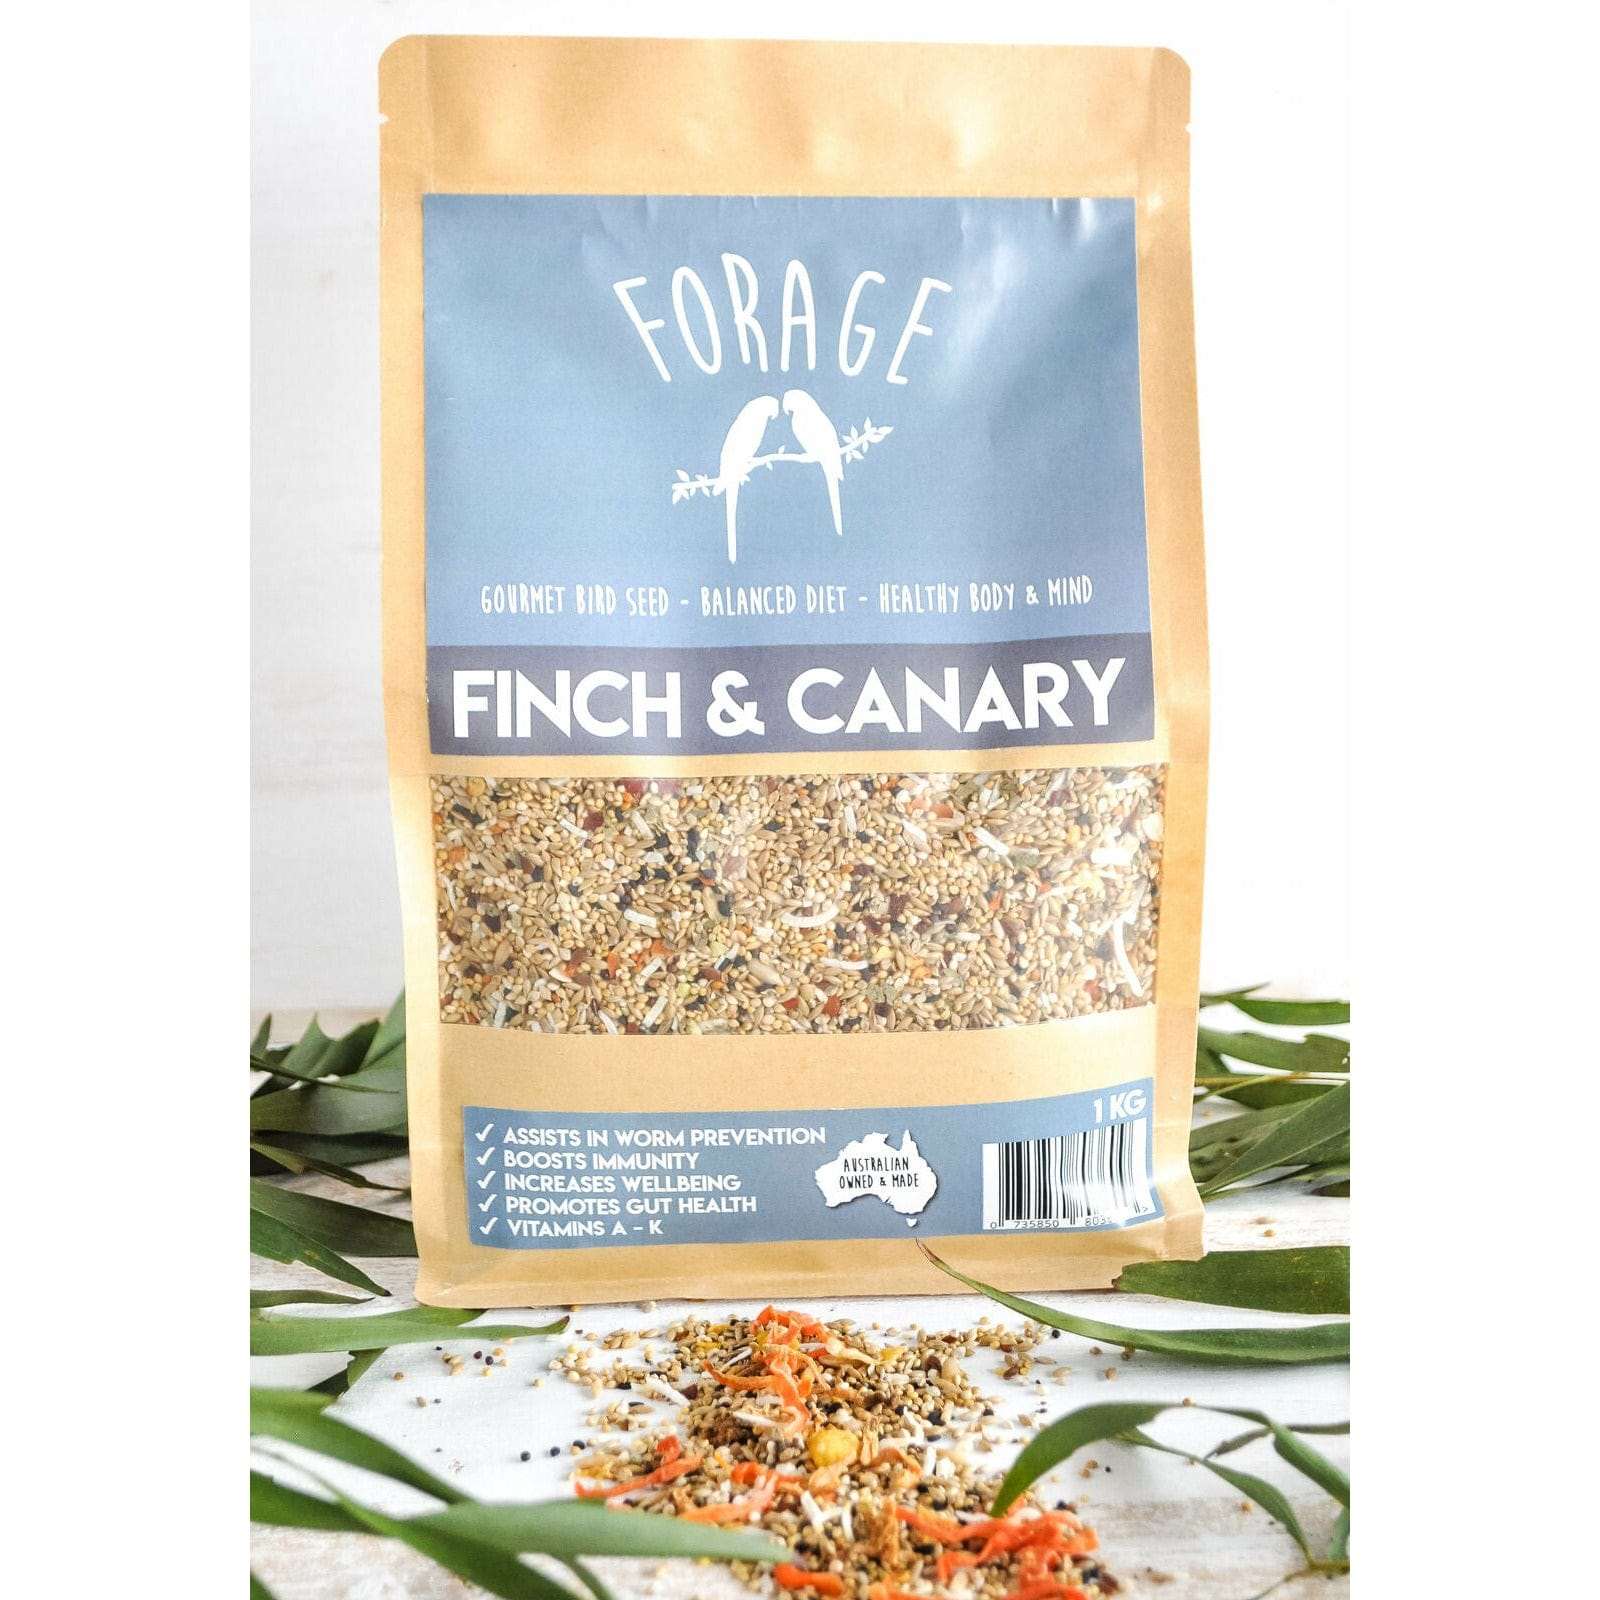 Forage Finch & Canary Mix (Excl. TAS & WA) from Forage Gourmet Seed